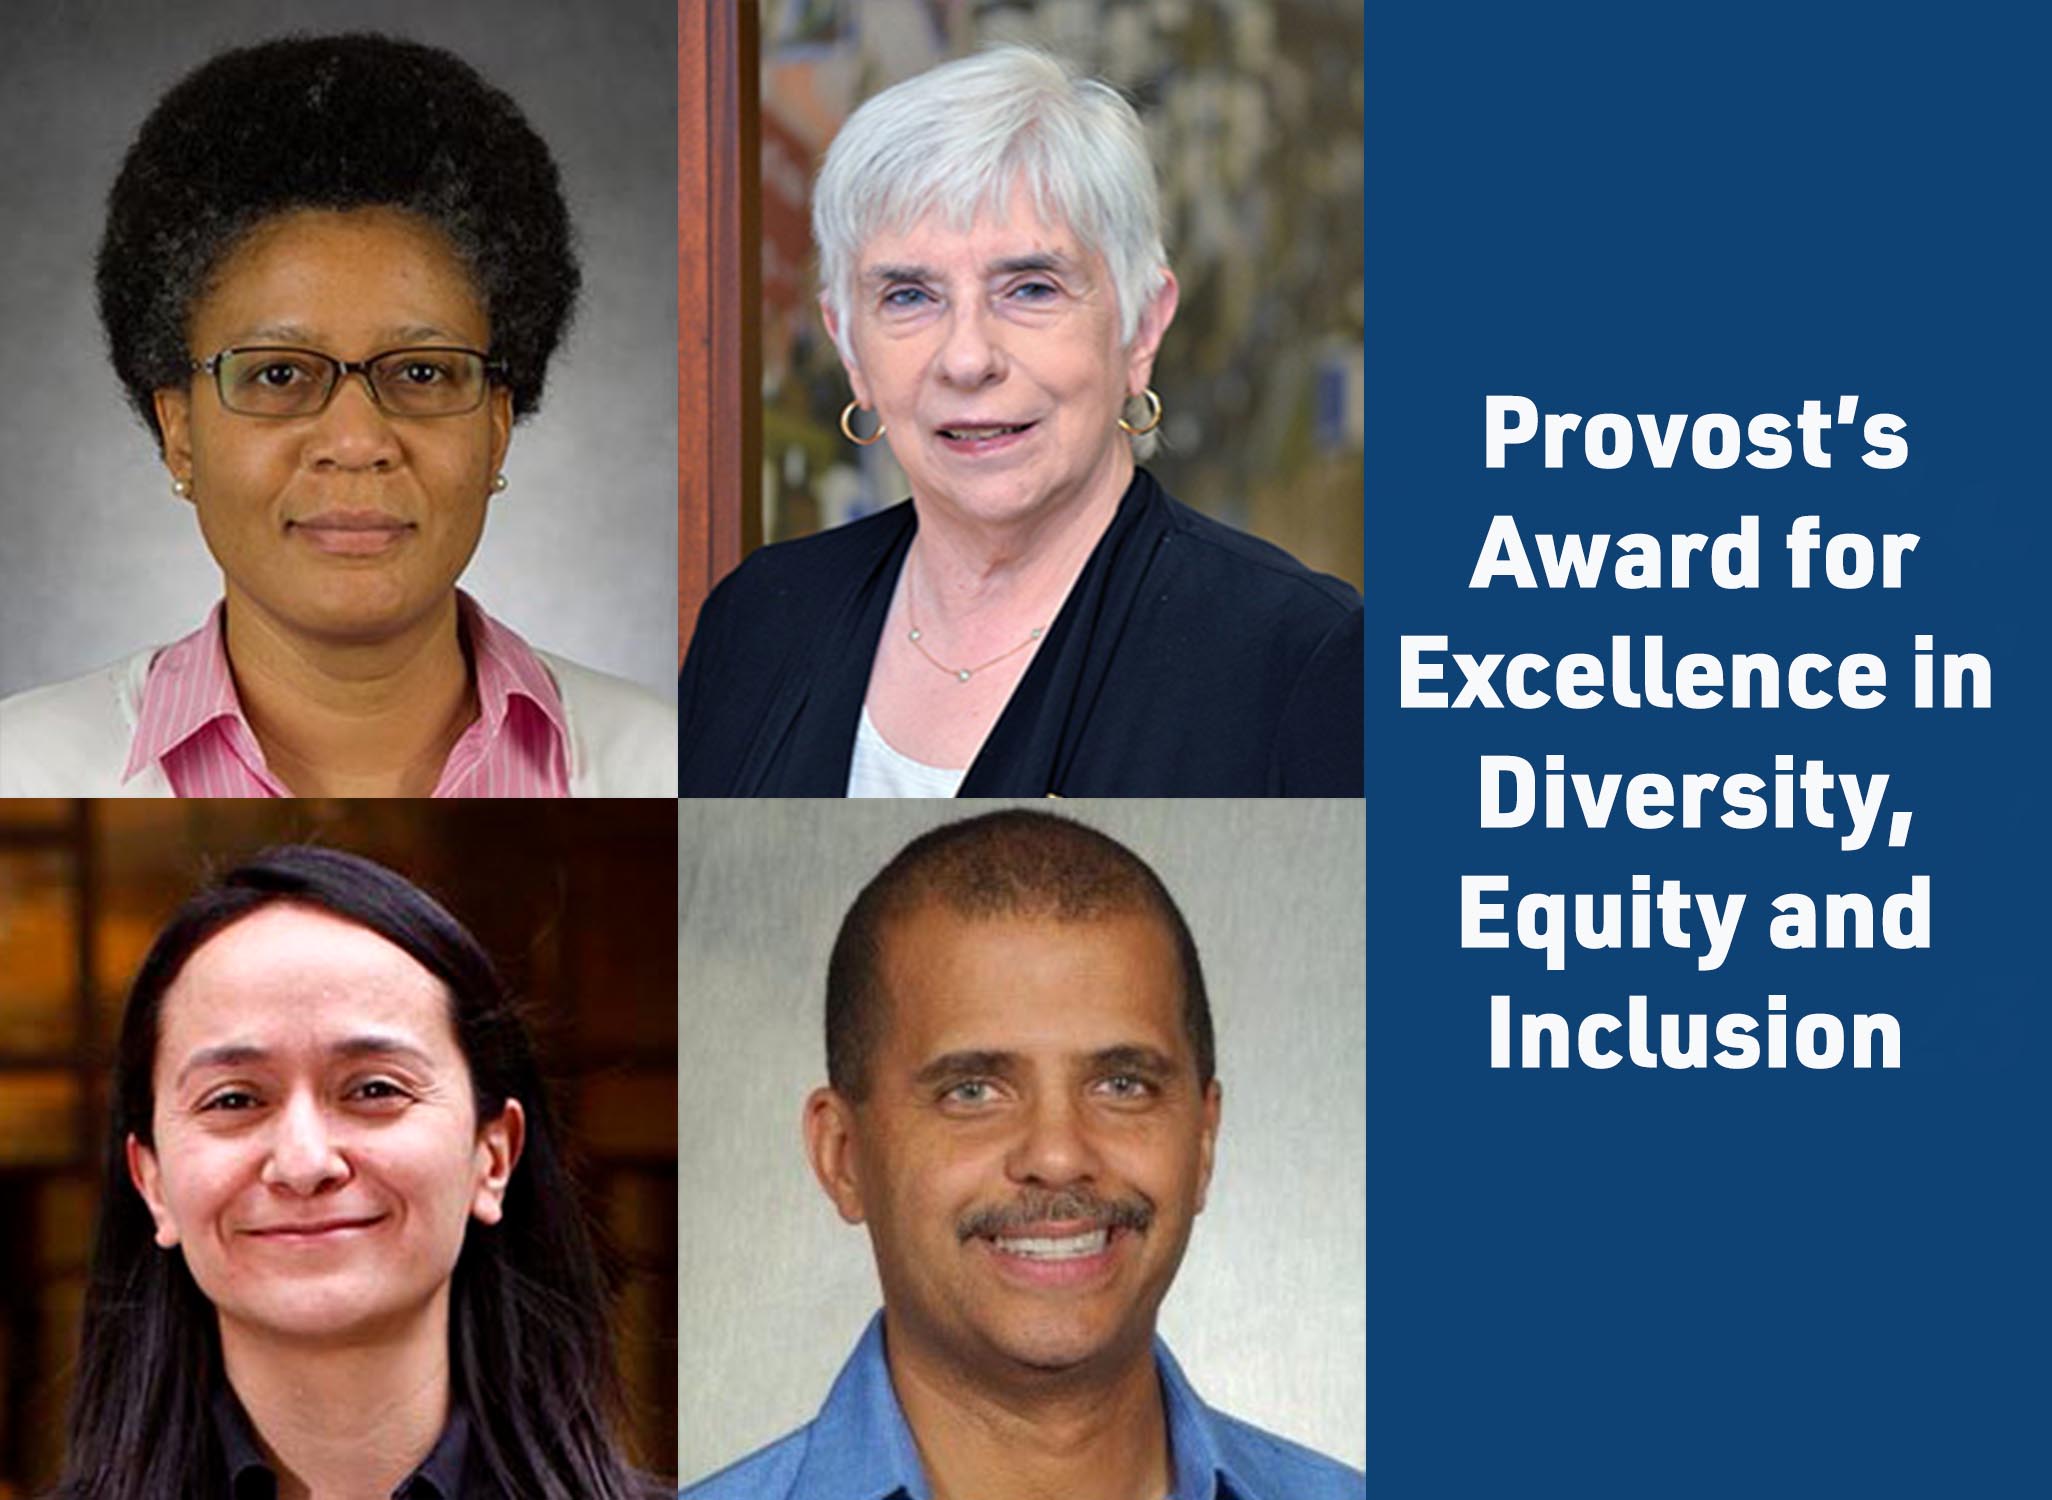 2022 honorees of the Provost's Award for Excellence in Diversity, Equity and Inclusion.